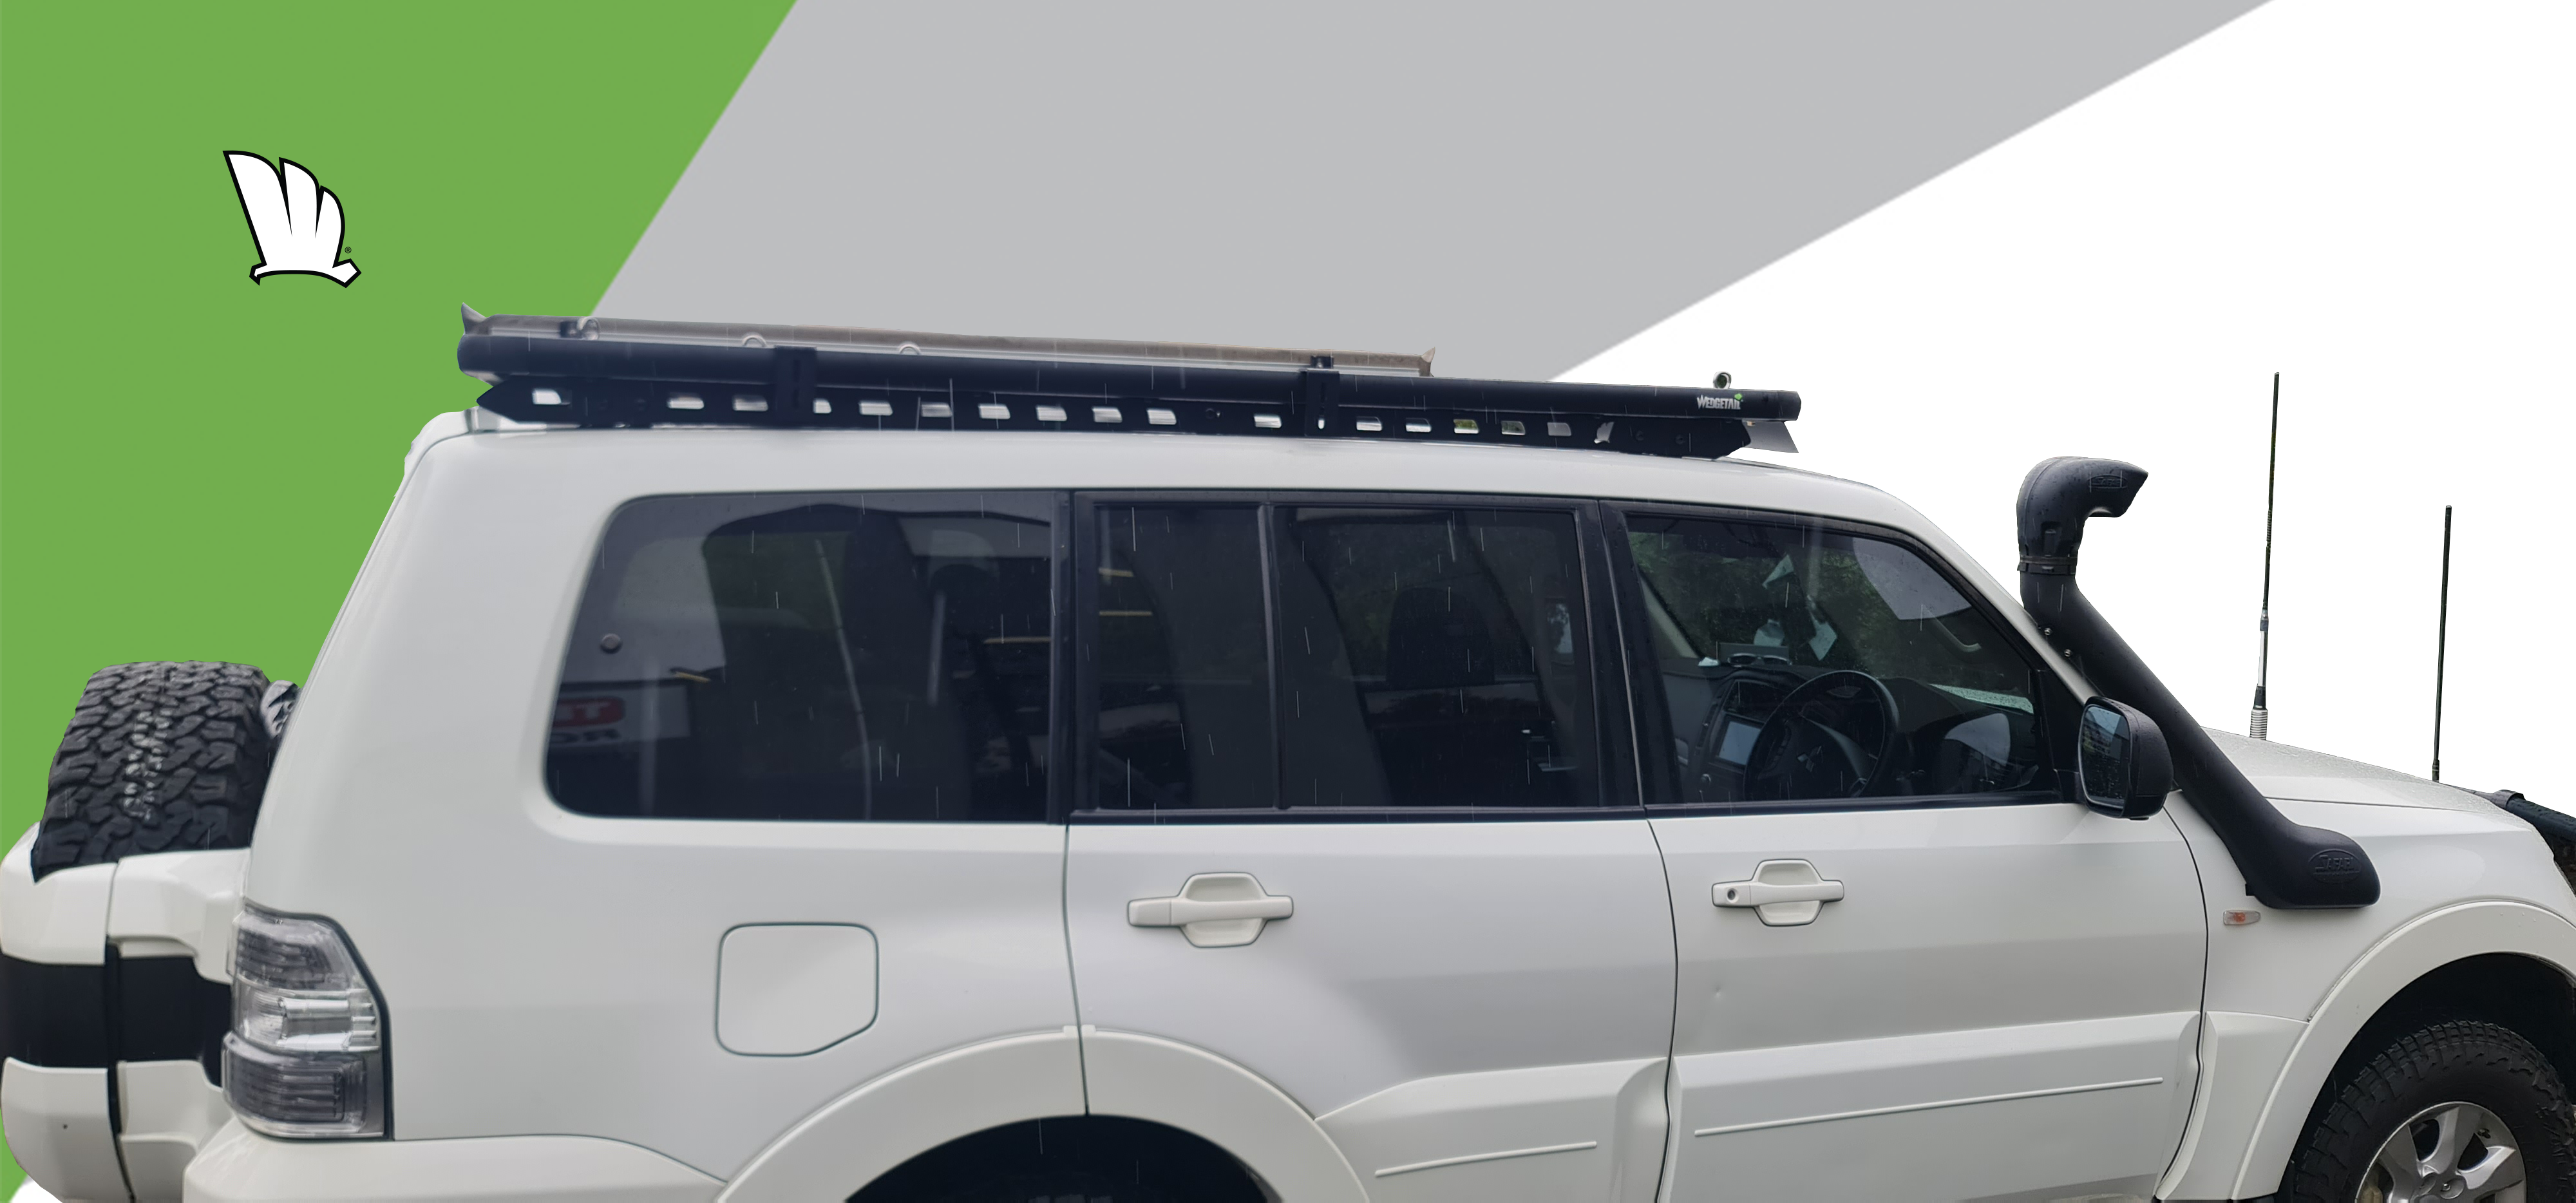 Mitsubishi Pajero Sport 20MY with Wedgetail roof rack installed.